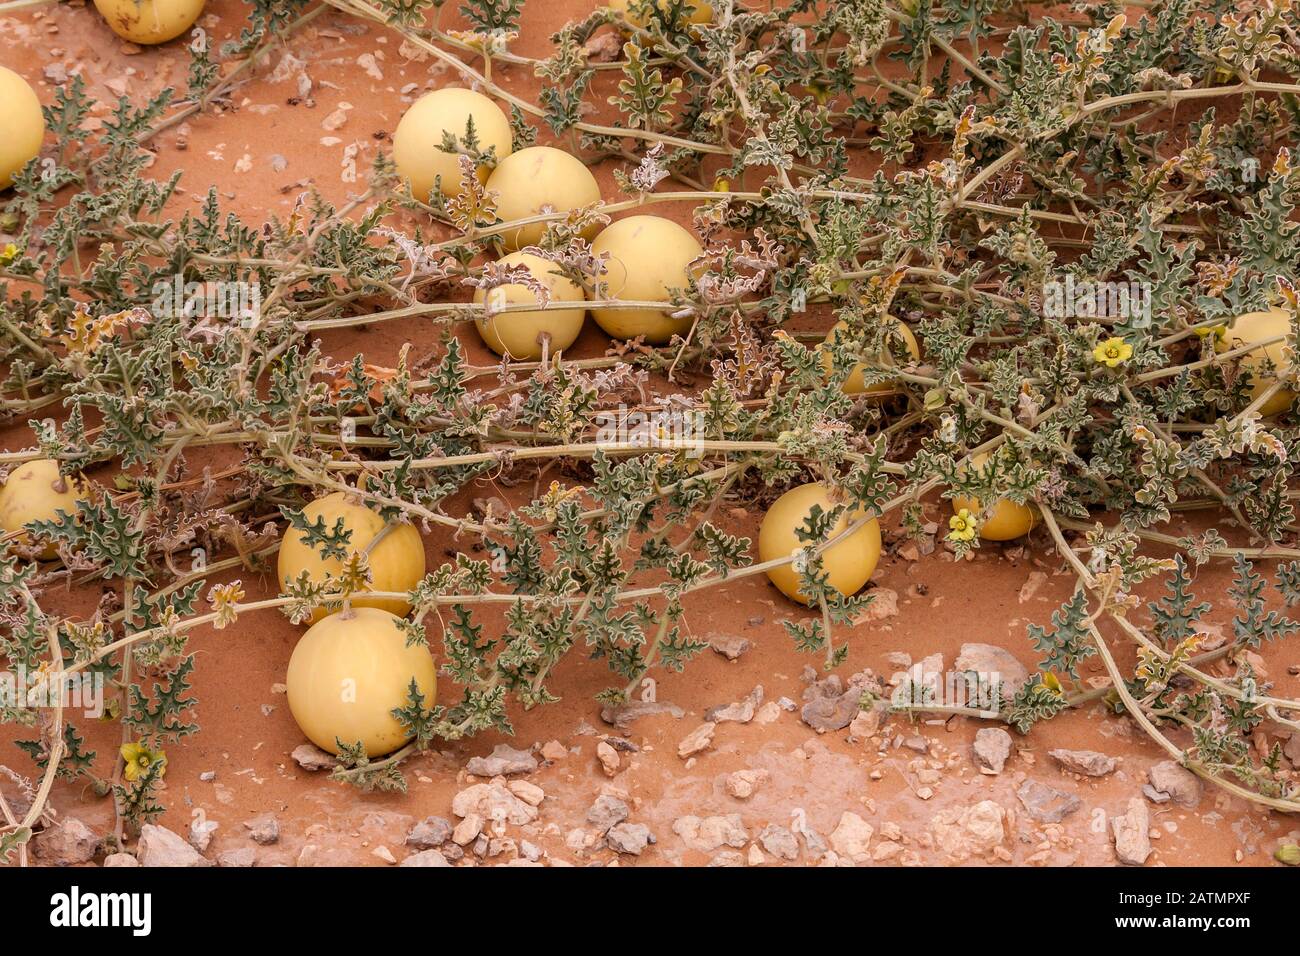 Wild desert gourd or colocynth (Citrullus colocynthis) Stock Photo